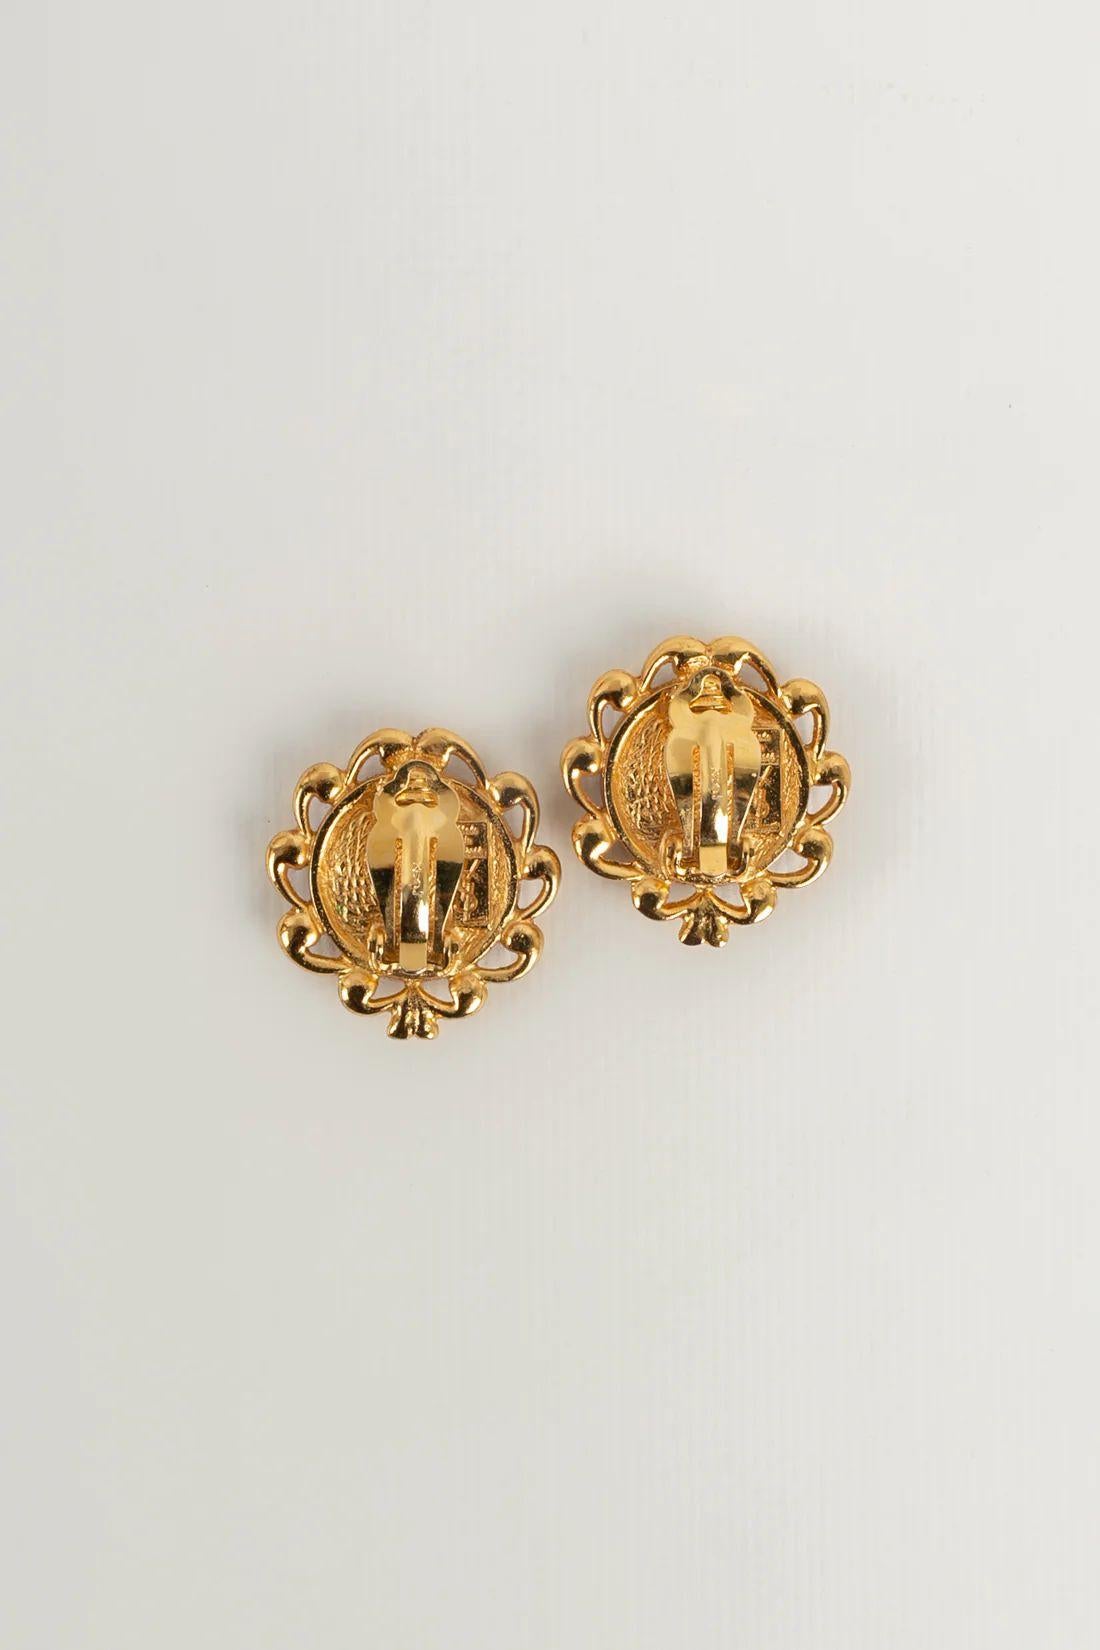 Yves Saint Laurent Earrings in Gold Metal and Red Resin For Sale 1